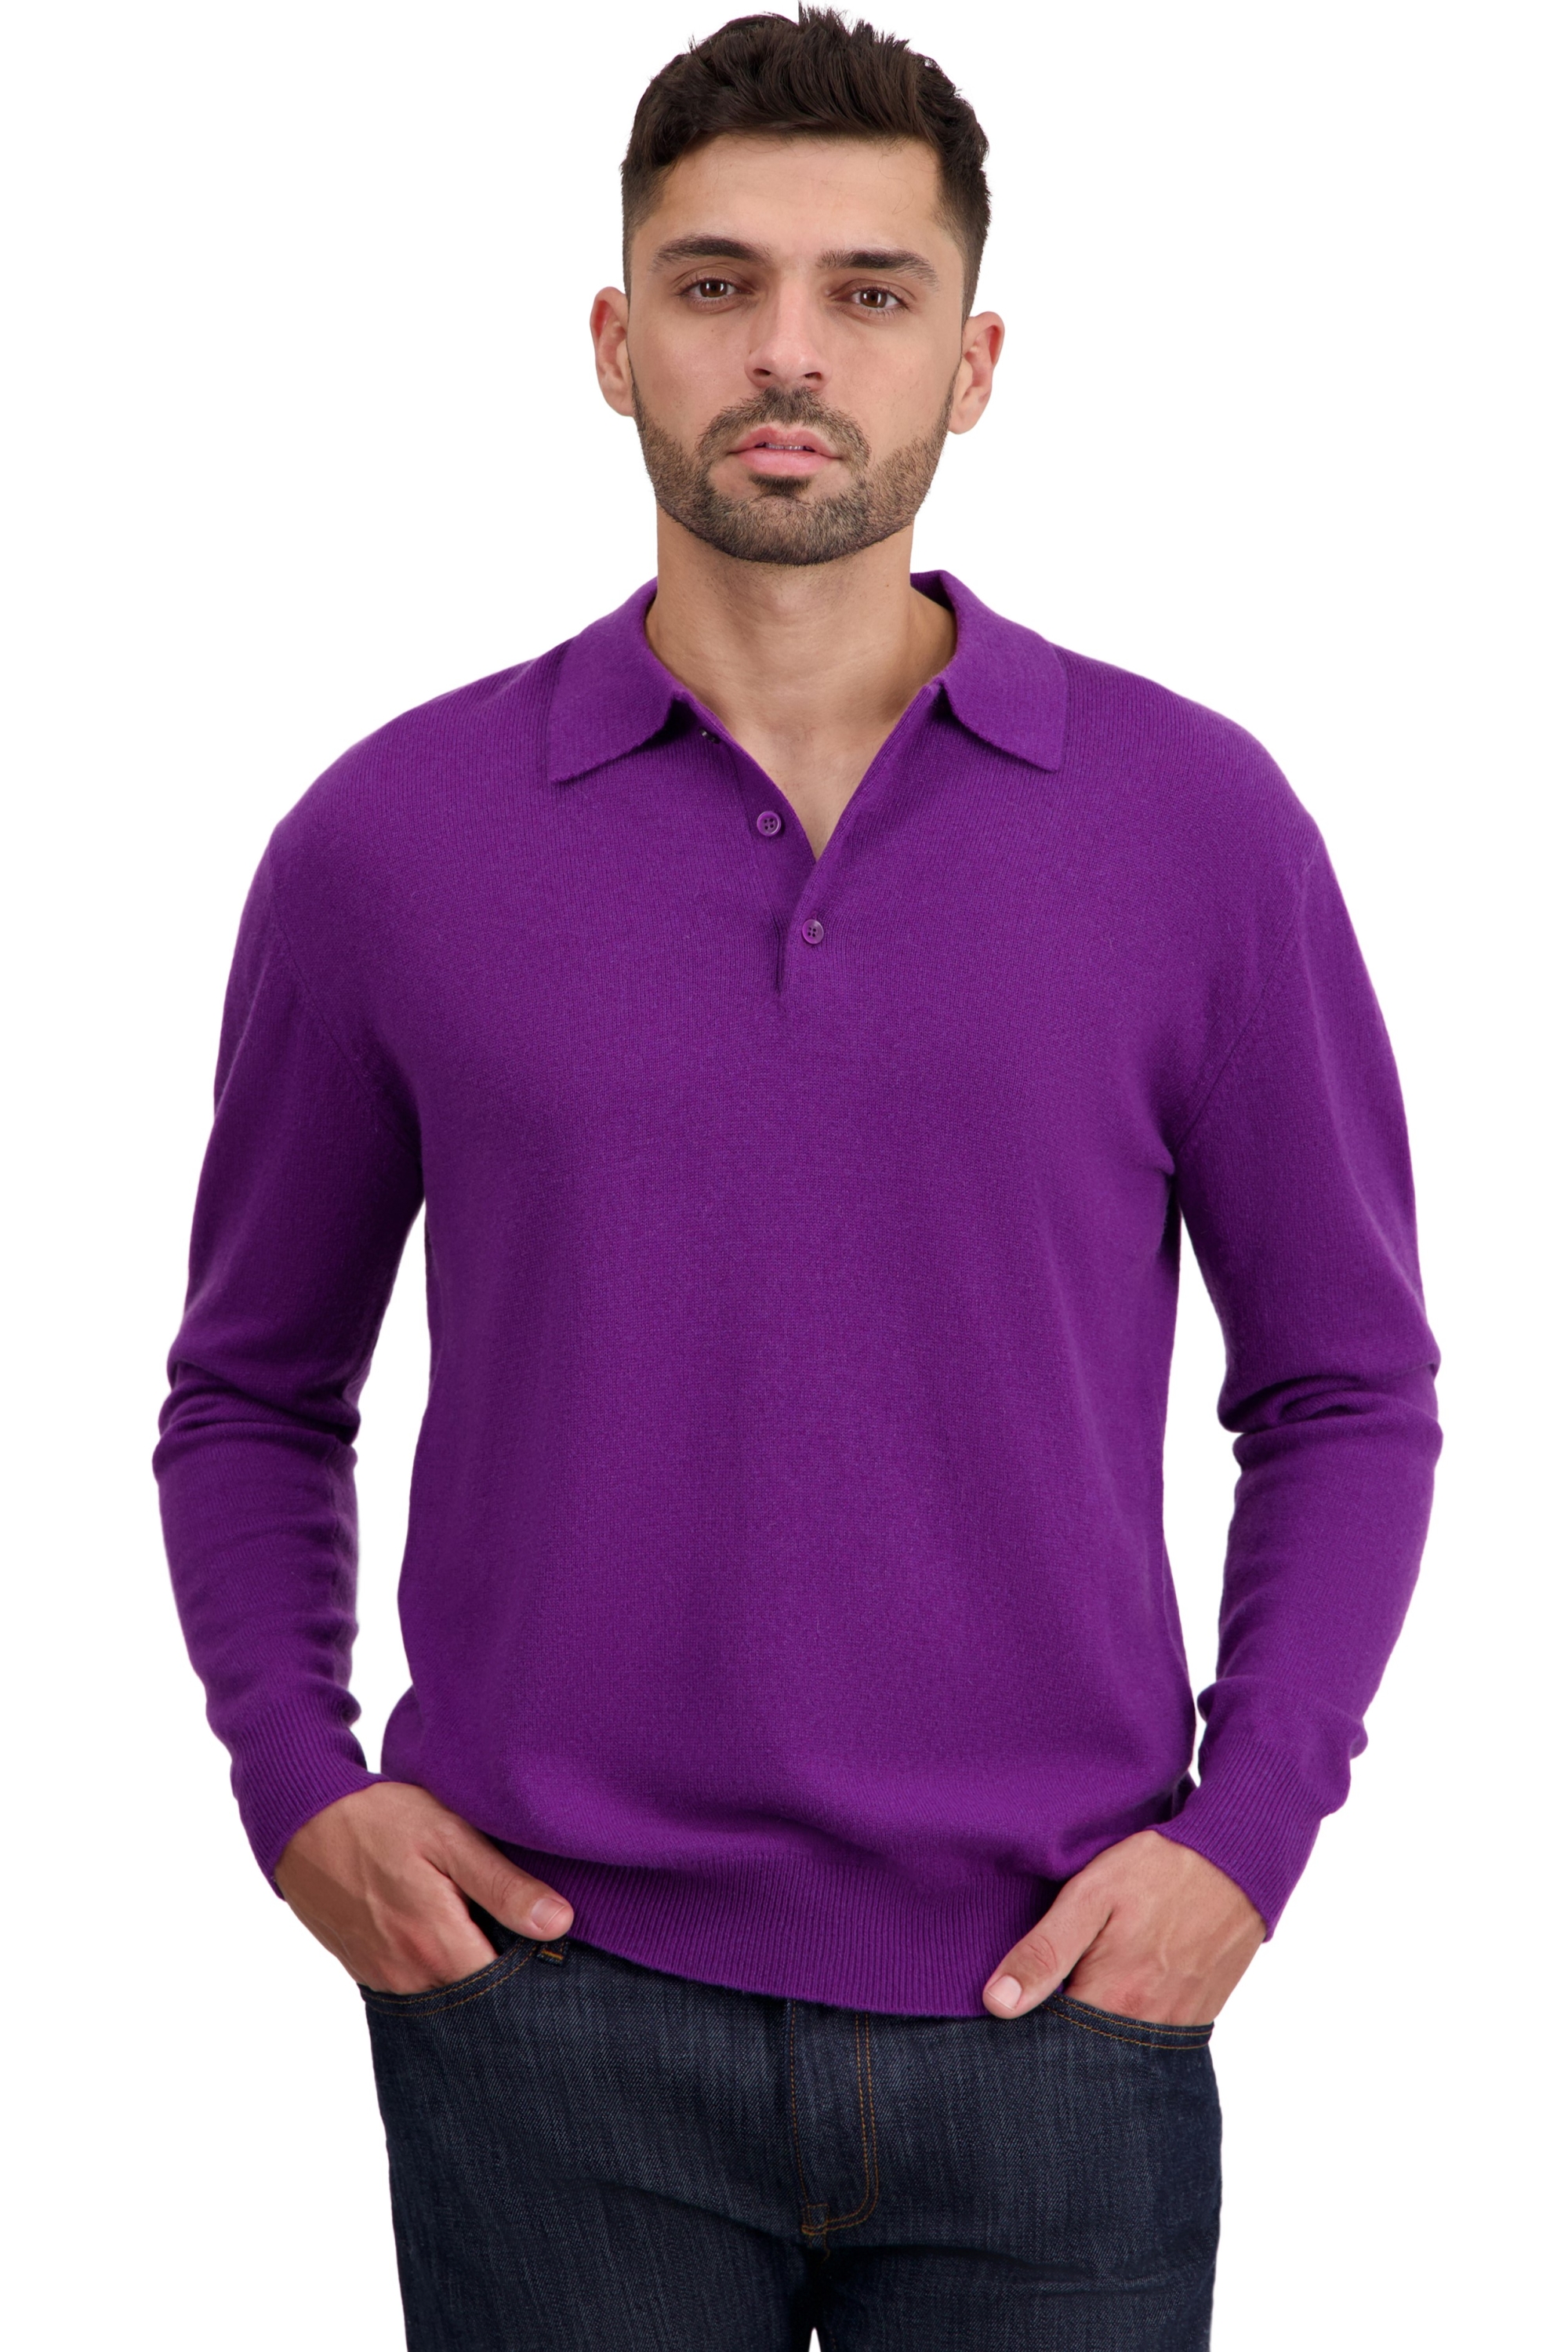 Cashmere men basic sweaters at low prices tarn first regalia xl